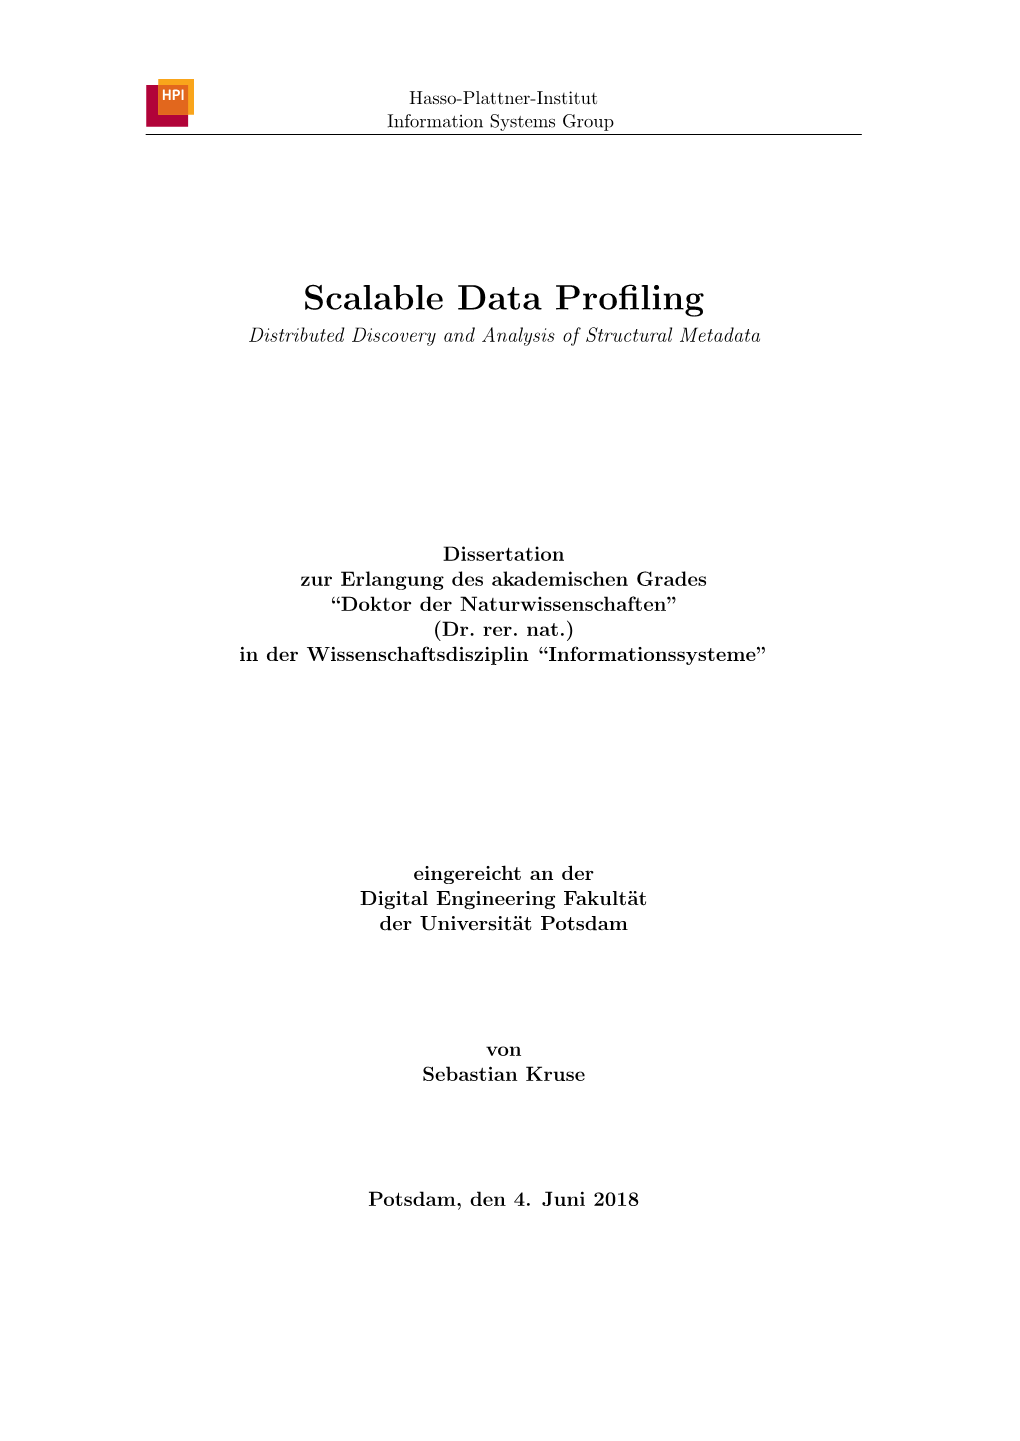 Scalable Data Profiling